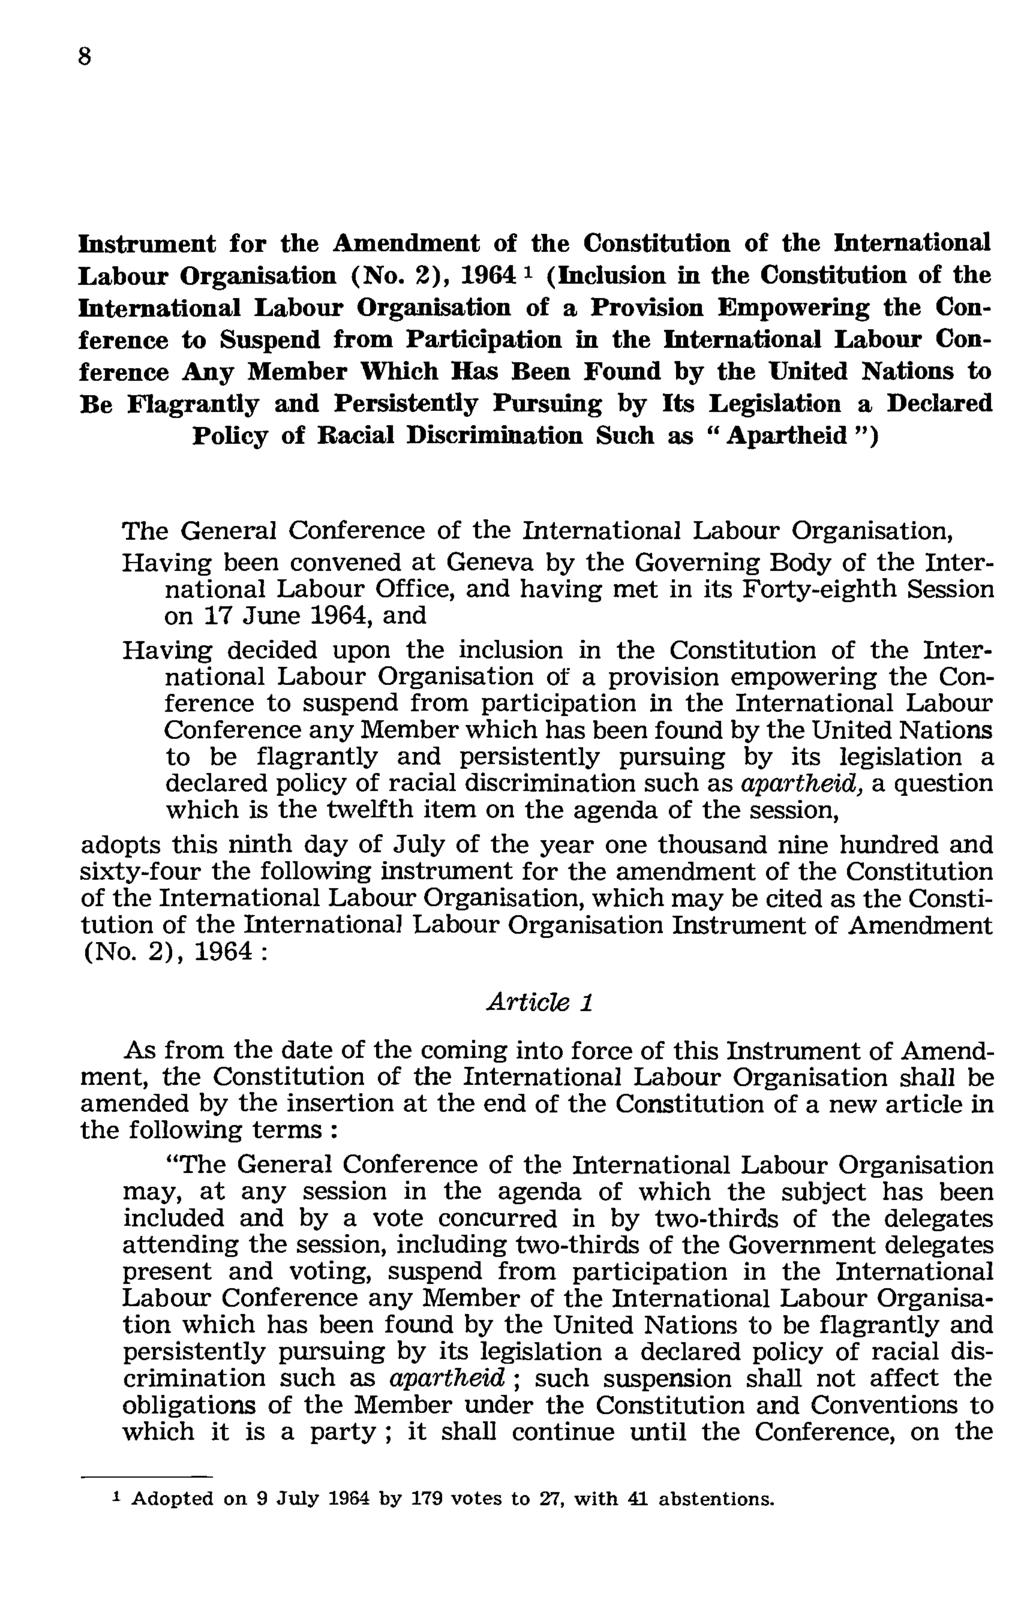 8 Instrument for the Amendment of the Constitution of the International Labour Organisation (No.